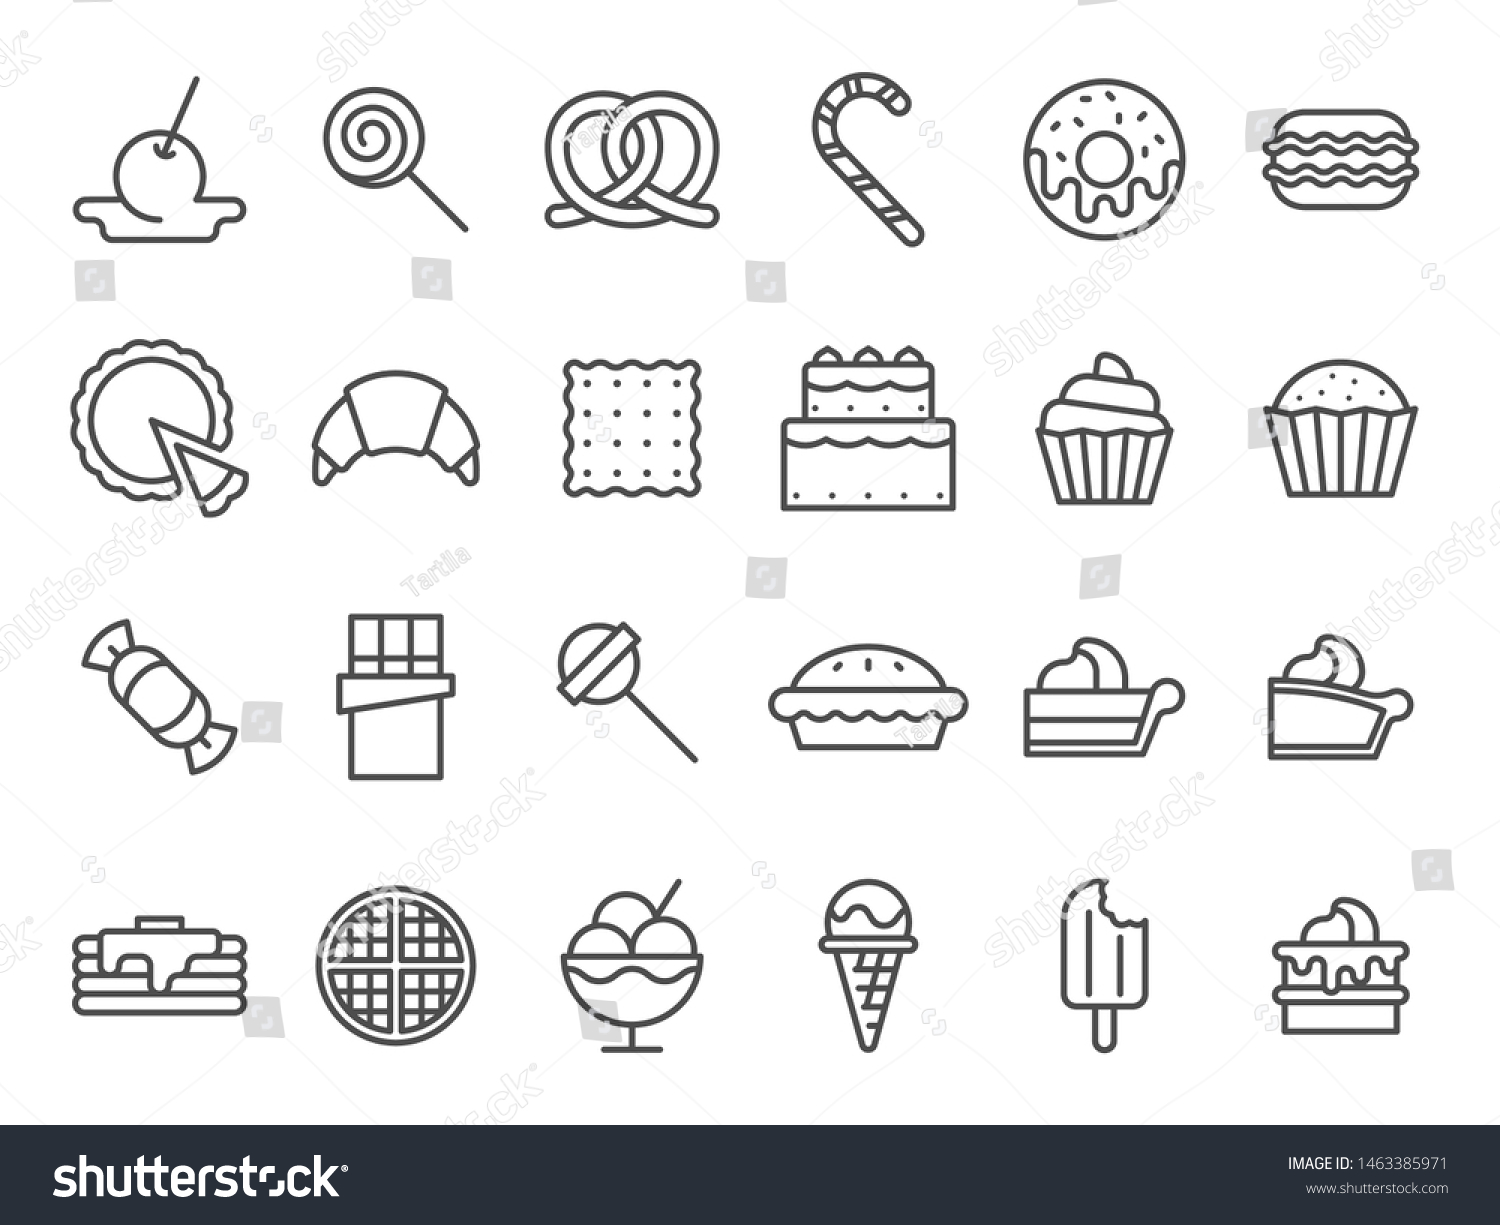 Sweet dessert icons. Sweetly cake, sweets ice cream and muffin cakes. Desserts line art pancakes, celebration chocolate cookies or cheesecream tart bakery dessert. Isolated vector icon set #1463385971